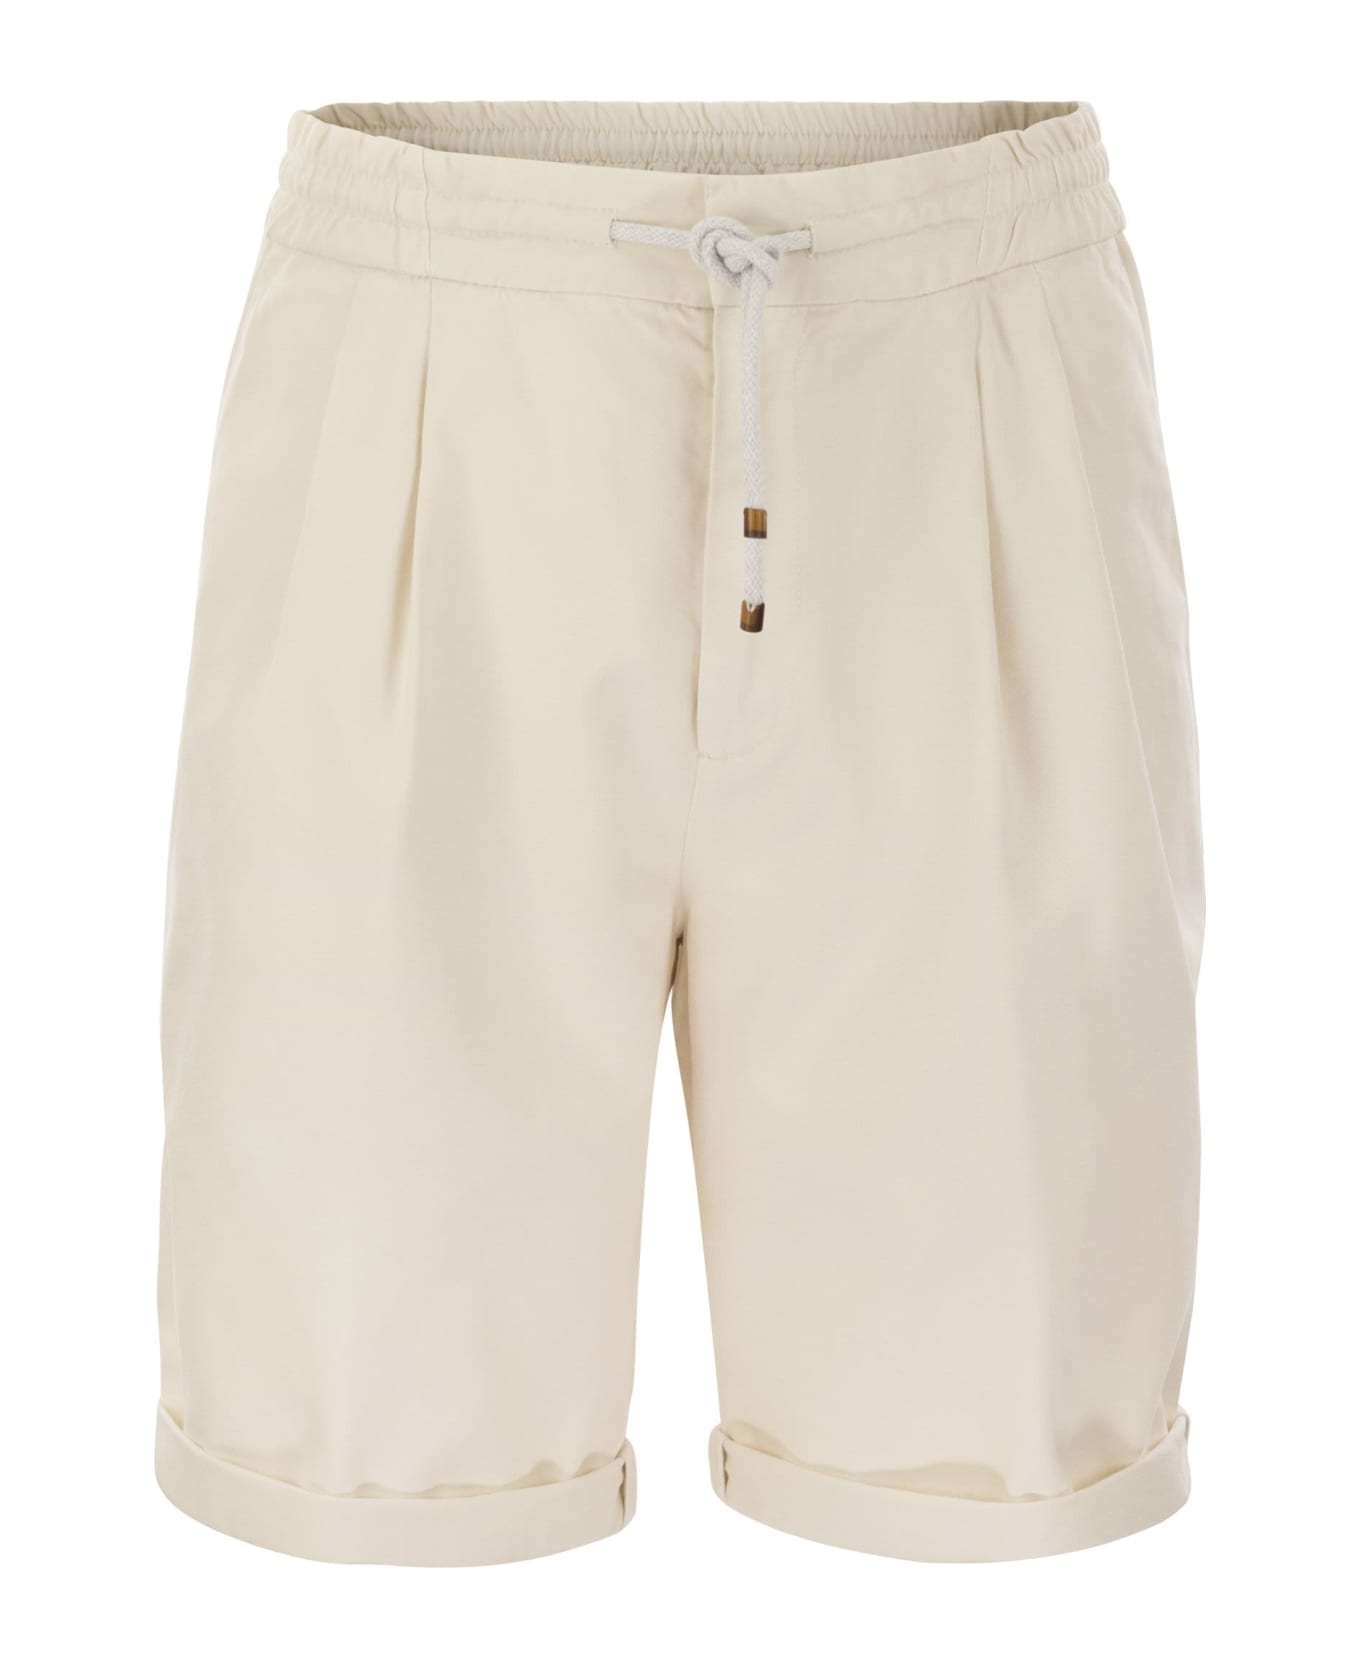 Brunello Cucinelli Bermuda Shorts In Garment-dyed Cotton Gabardine With Drawstring And Double Darts - White